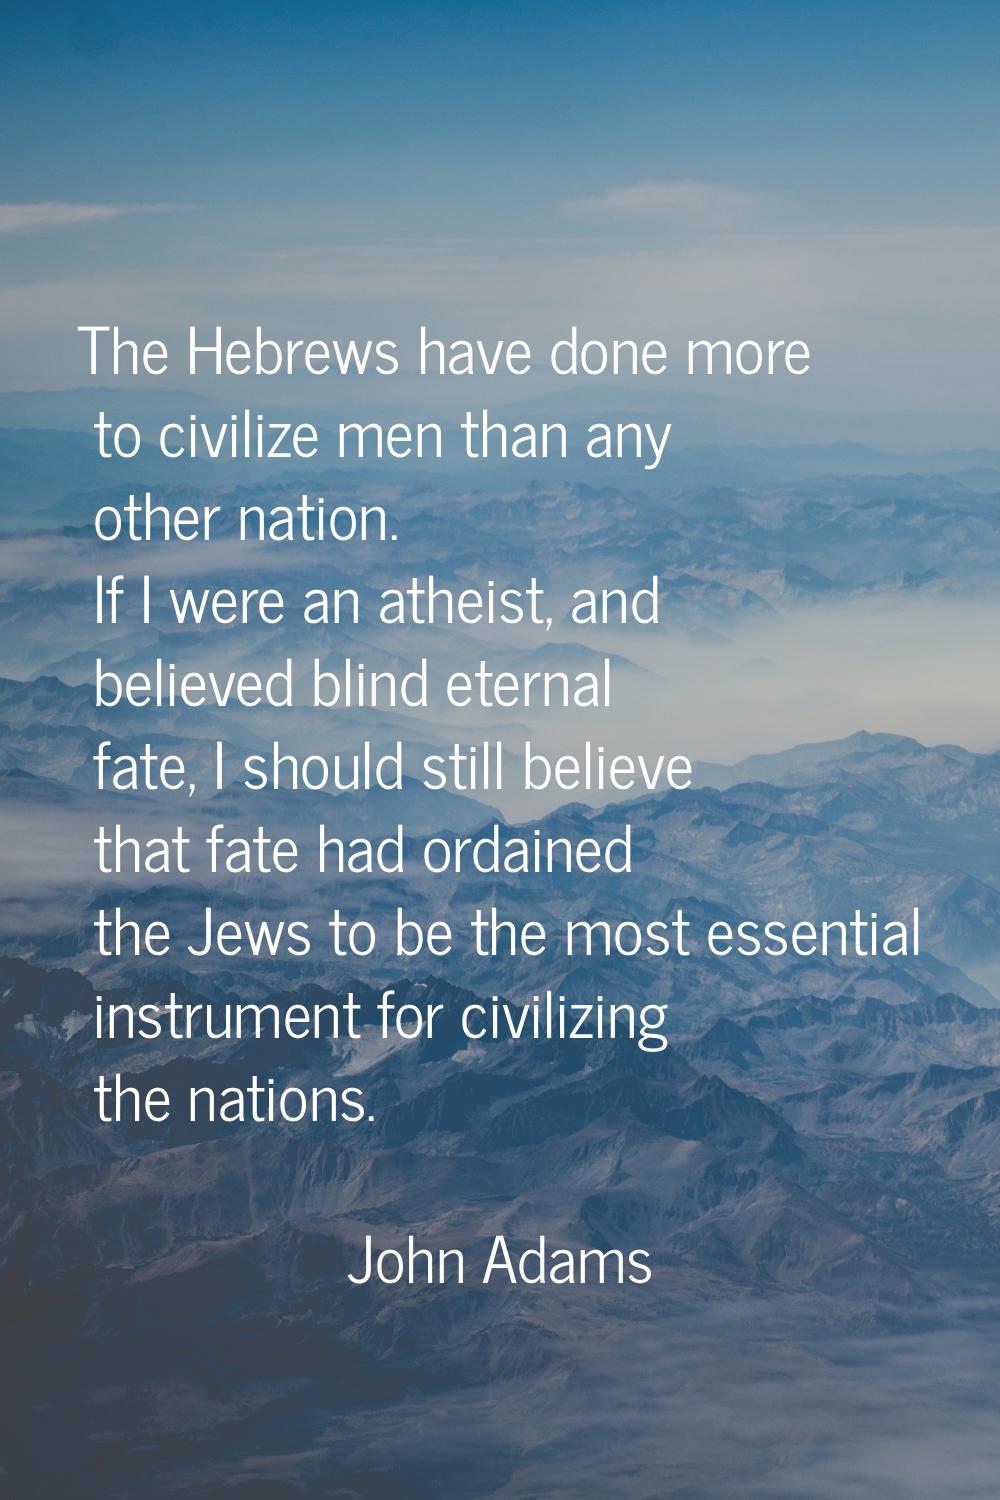 The Hebrews have done more to civilize men than any other nation. If I were an atheist, and believe